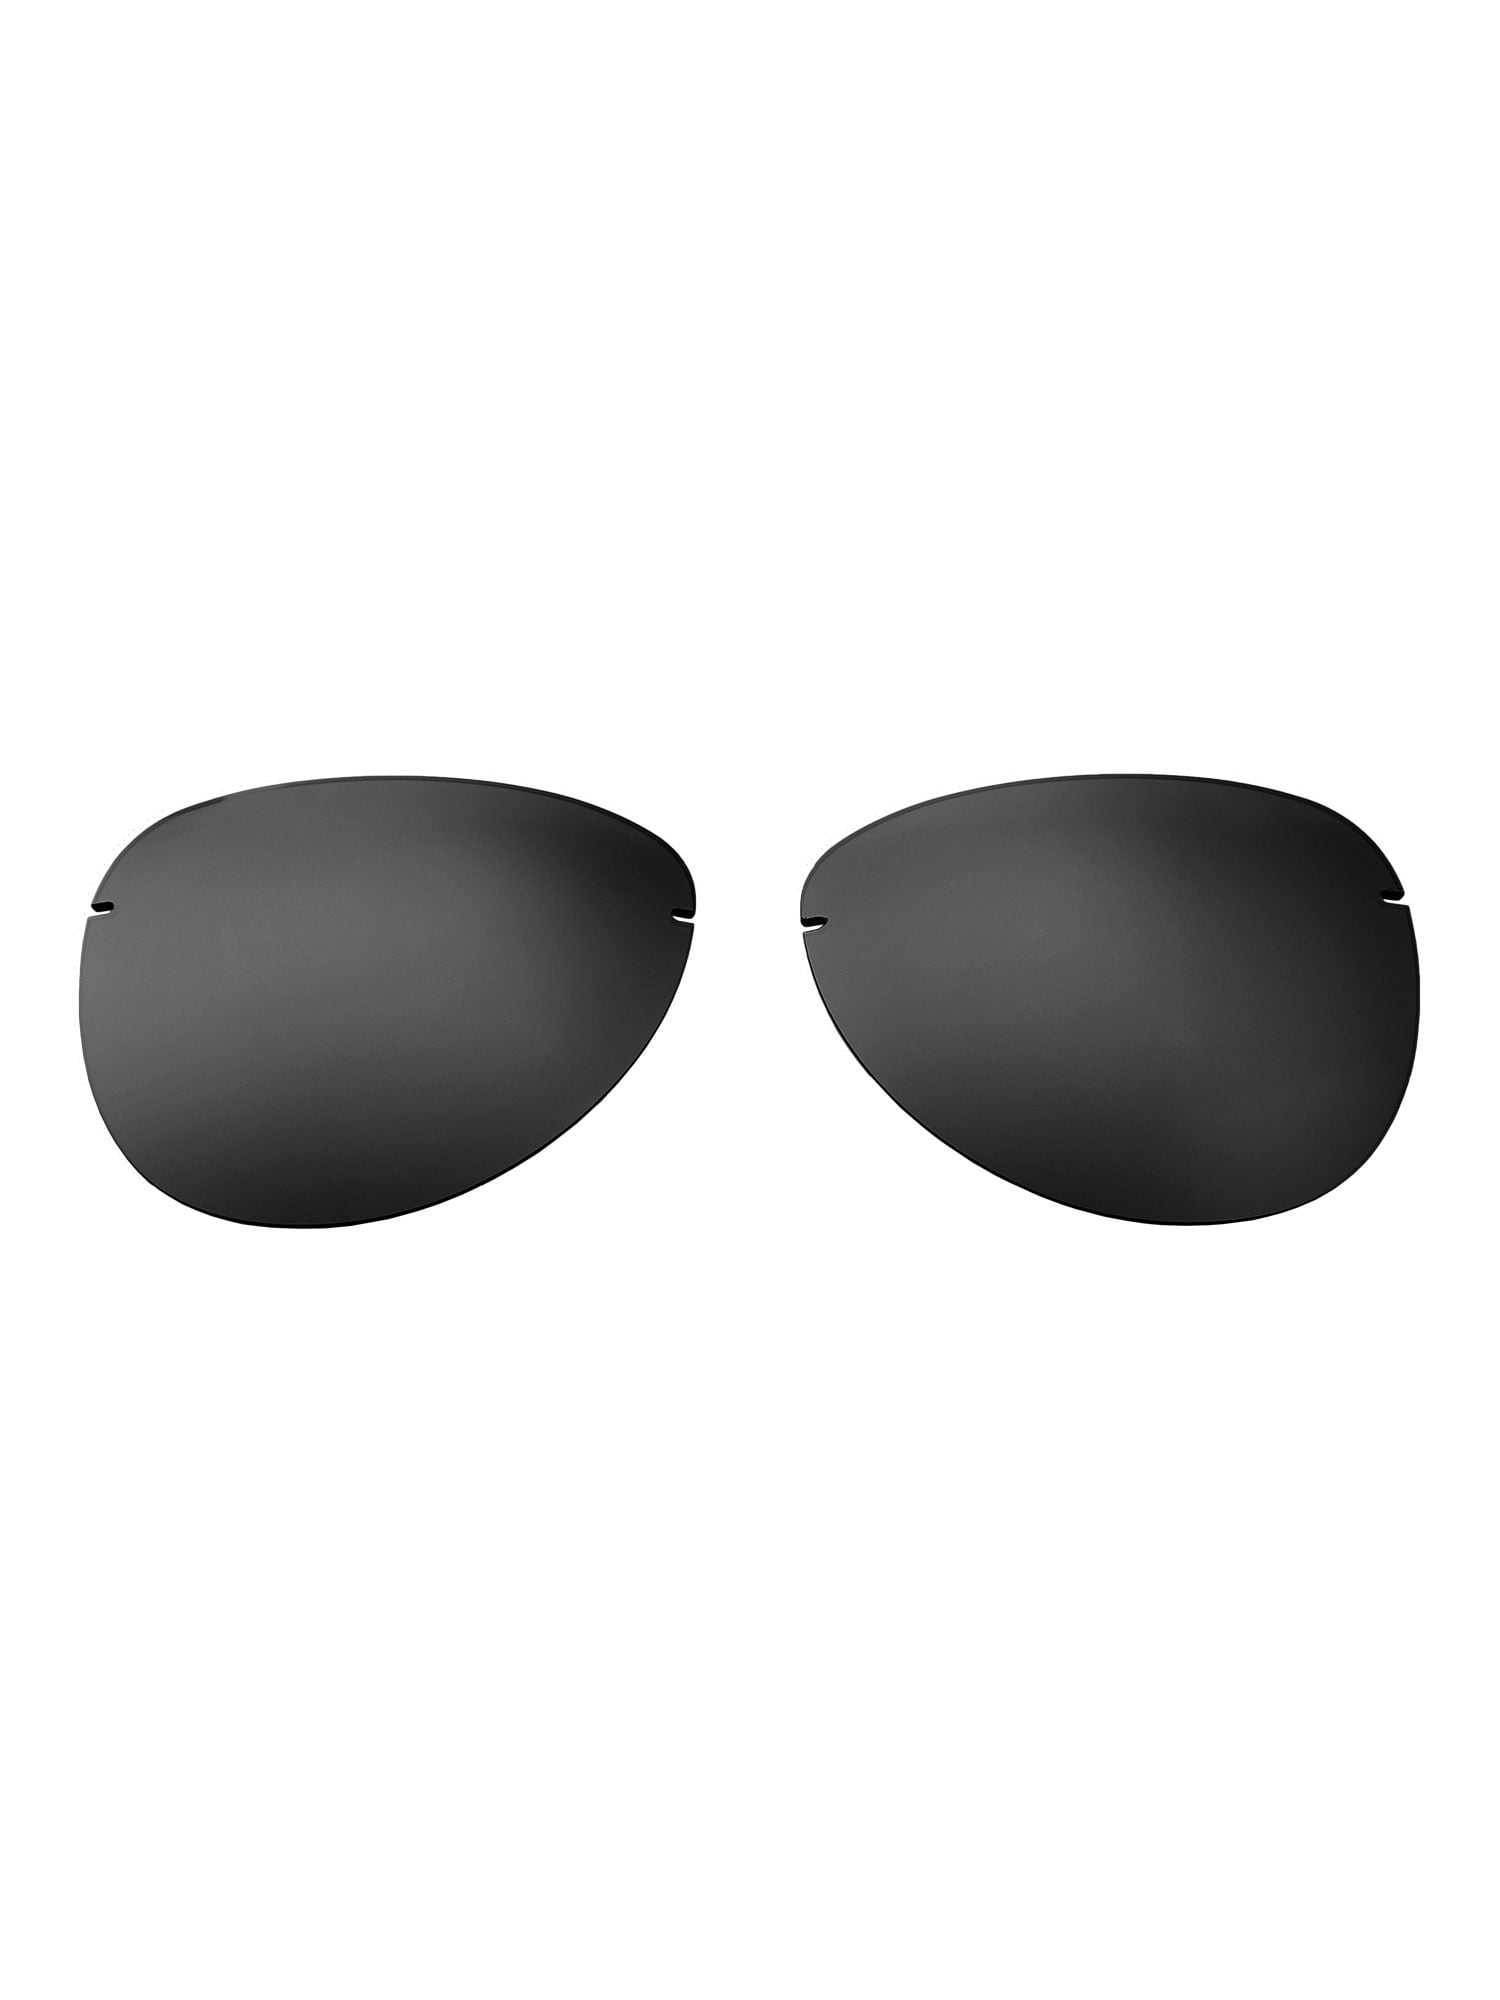 tailpin replacement lenses